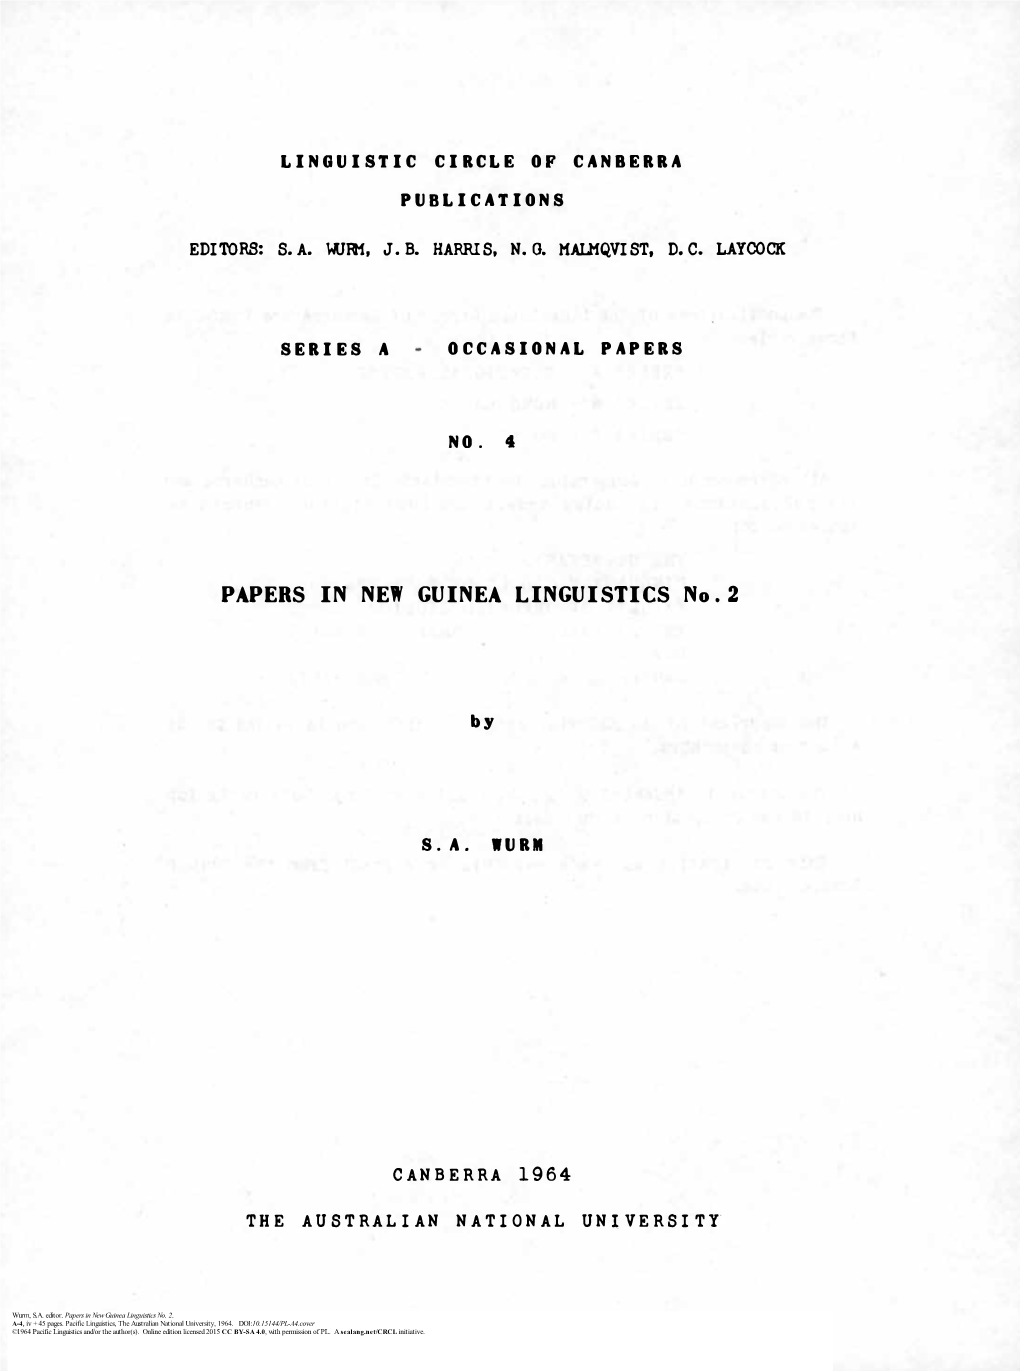 Papers in New Guinea Linguistics No. 2